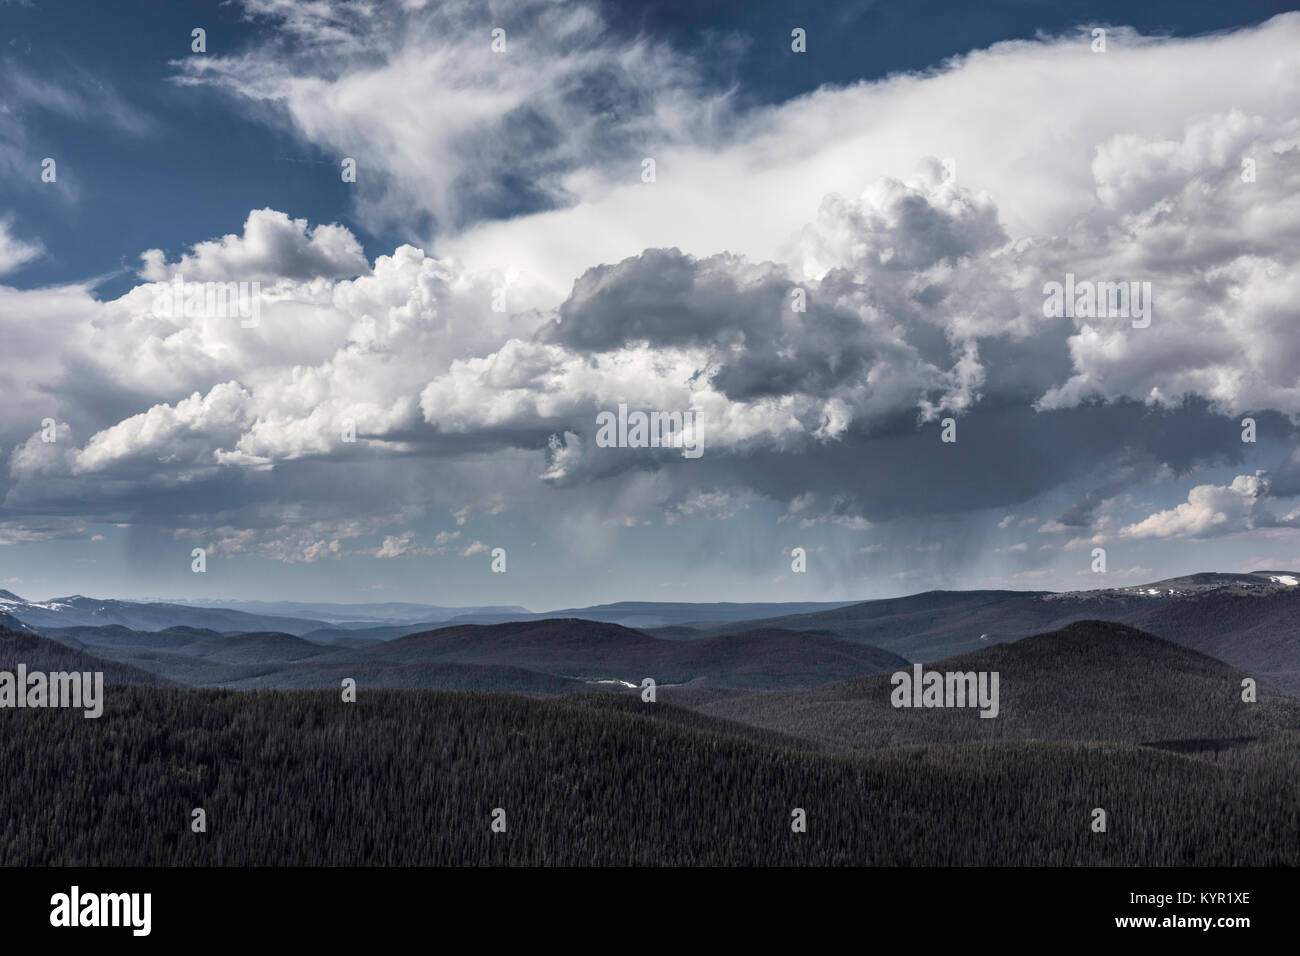 Dramatic sky over the foothills of the Rocky Mountains, Colorado, USA Stock Photo